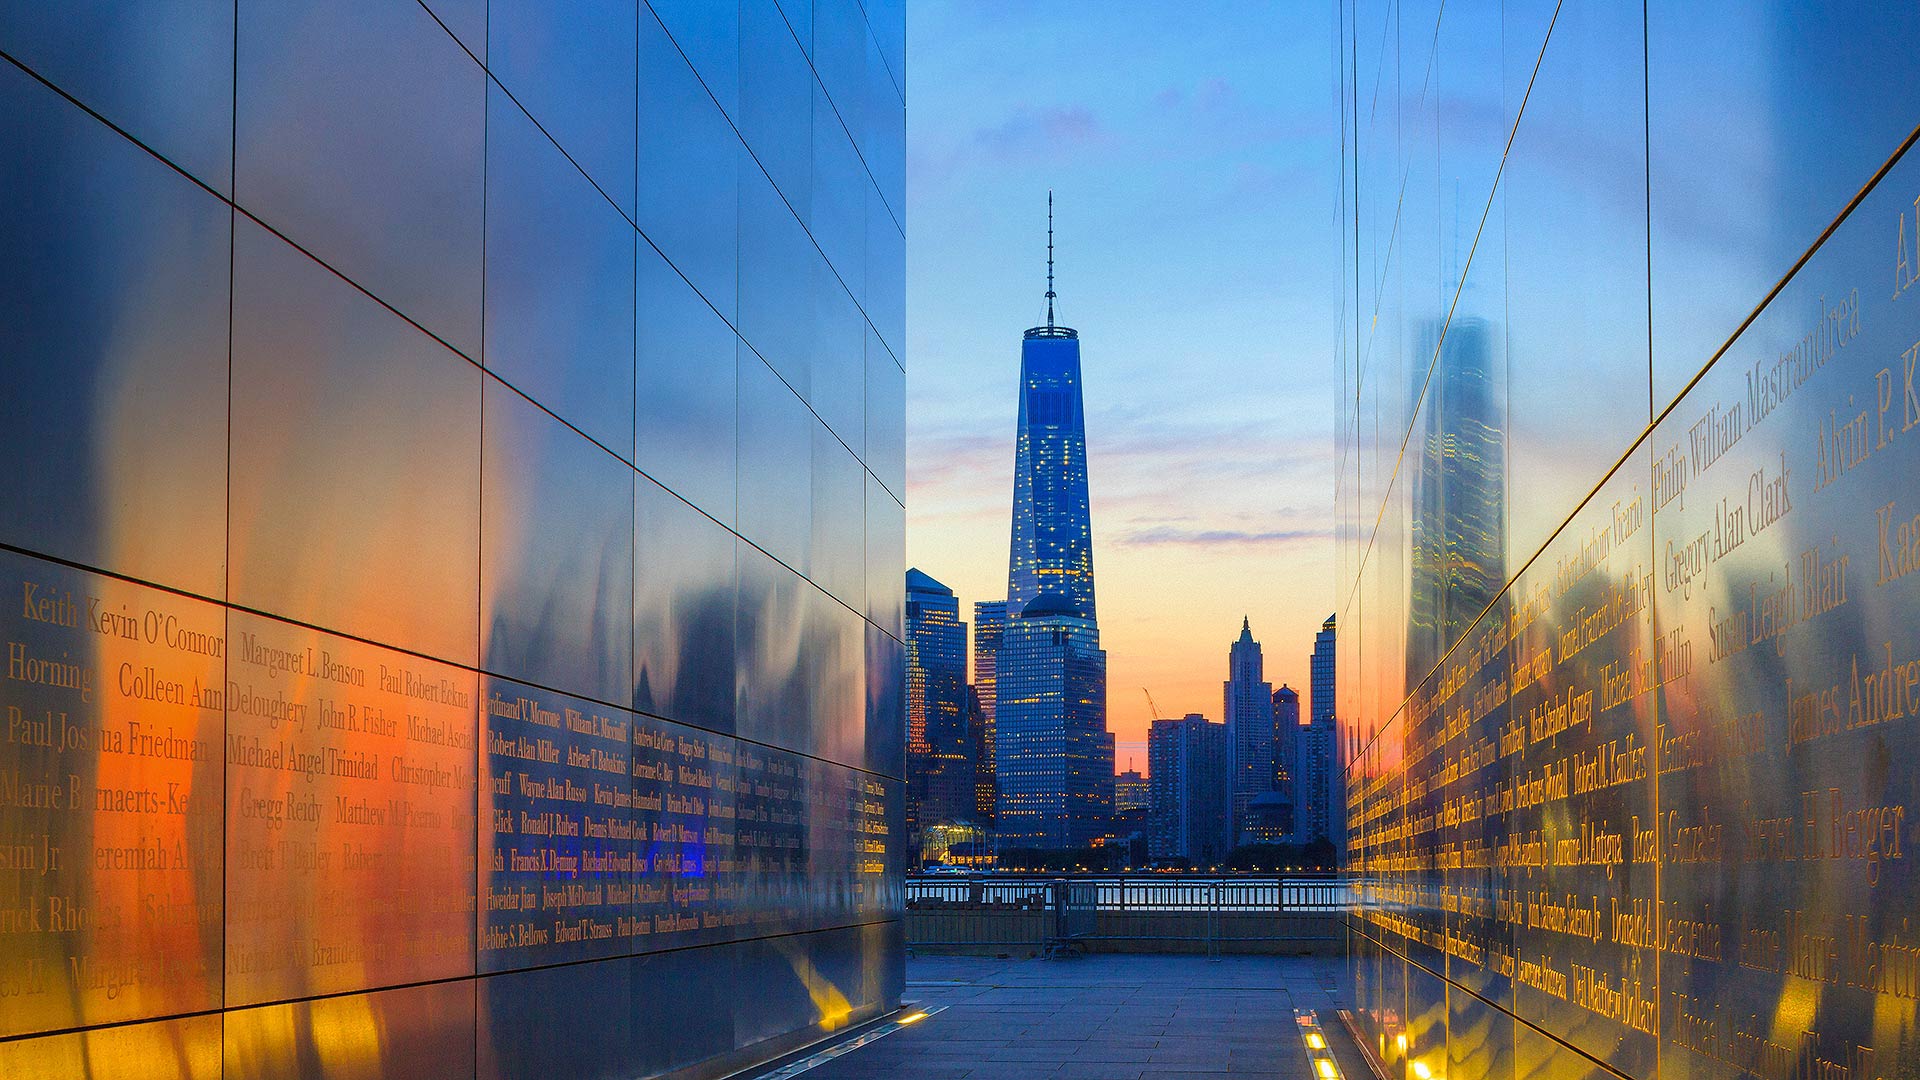 One World Trade Center and lower Manhattan, seen from the Empty Sky memorial in Jersey City, New Jersey - Maurizio Rellini/Offset by Shutterstock)